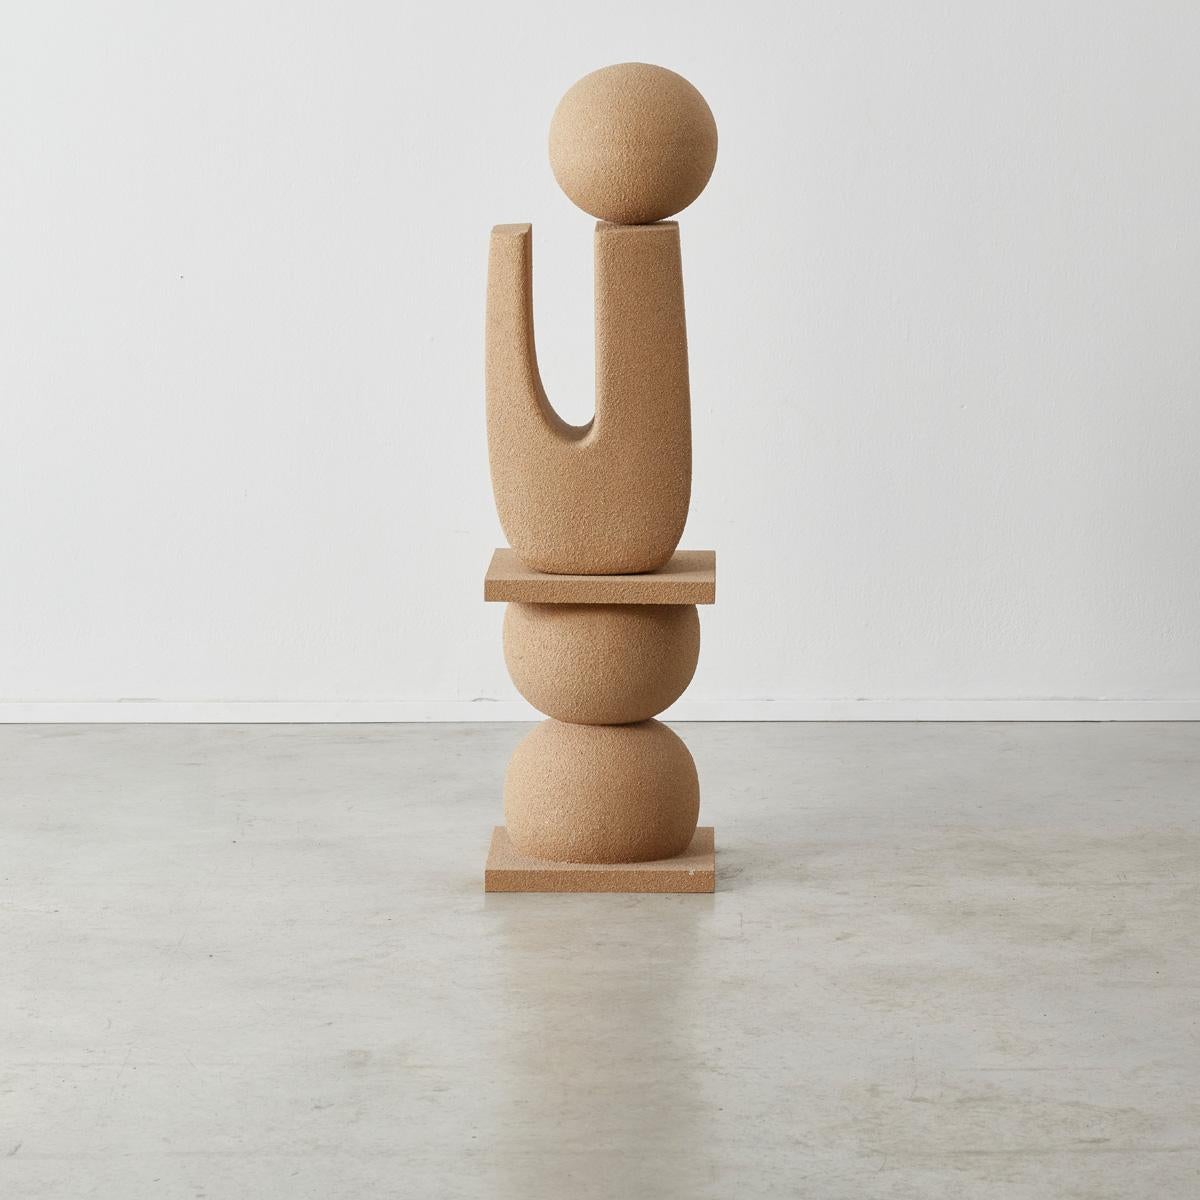 An abstract sculptural work comprised of stacked abstract shapes that appear to balance on top of each other. The surface is made of resin and sand creating a sandstone like texture without the weight. 

This totem sculpture makes the perfect